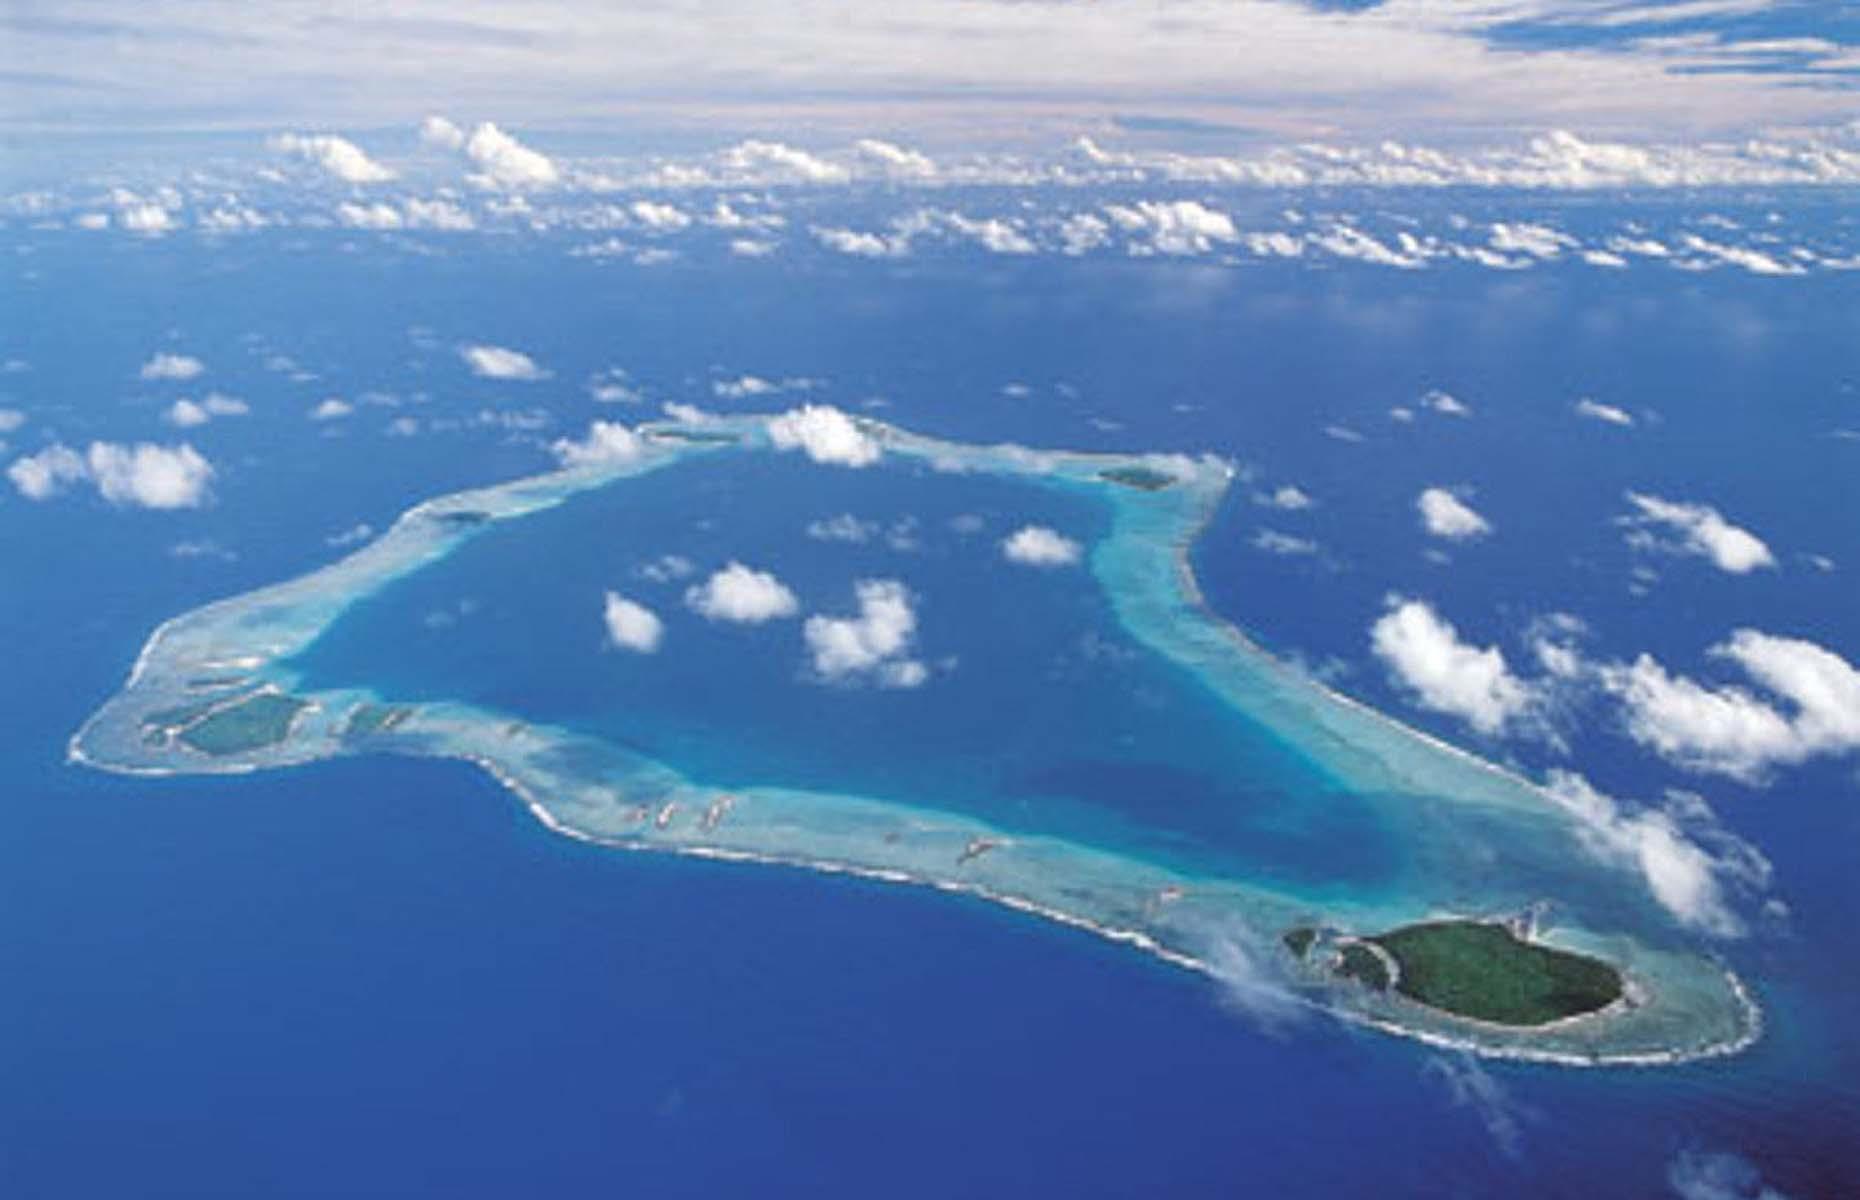 <p>Around 2,000 miles northeast of New Zealand sits the self-sufficient island of Palmerston. One of the 15 Cook Islands, the atoll has a population of less than 60 people, all of whom permanently reside in one of the most isolated communities on the planet. </p>